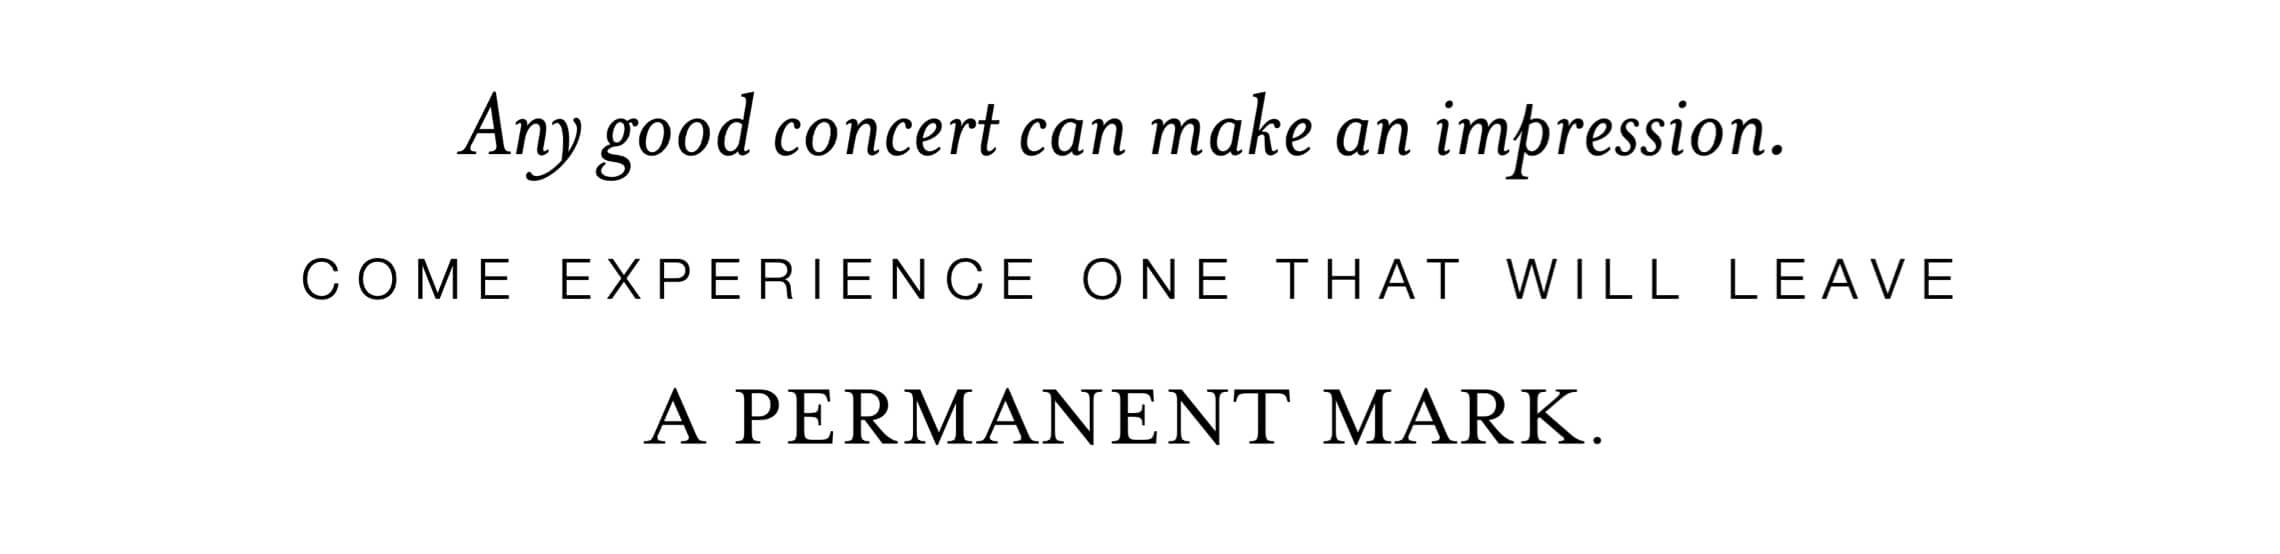 graphic displaying the phrase "Any good concert can make an impression. Come experience one that will leave a permanent mark."